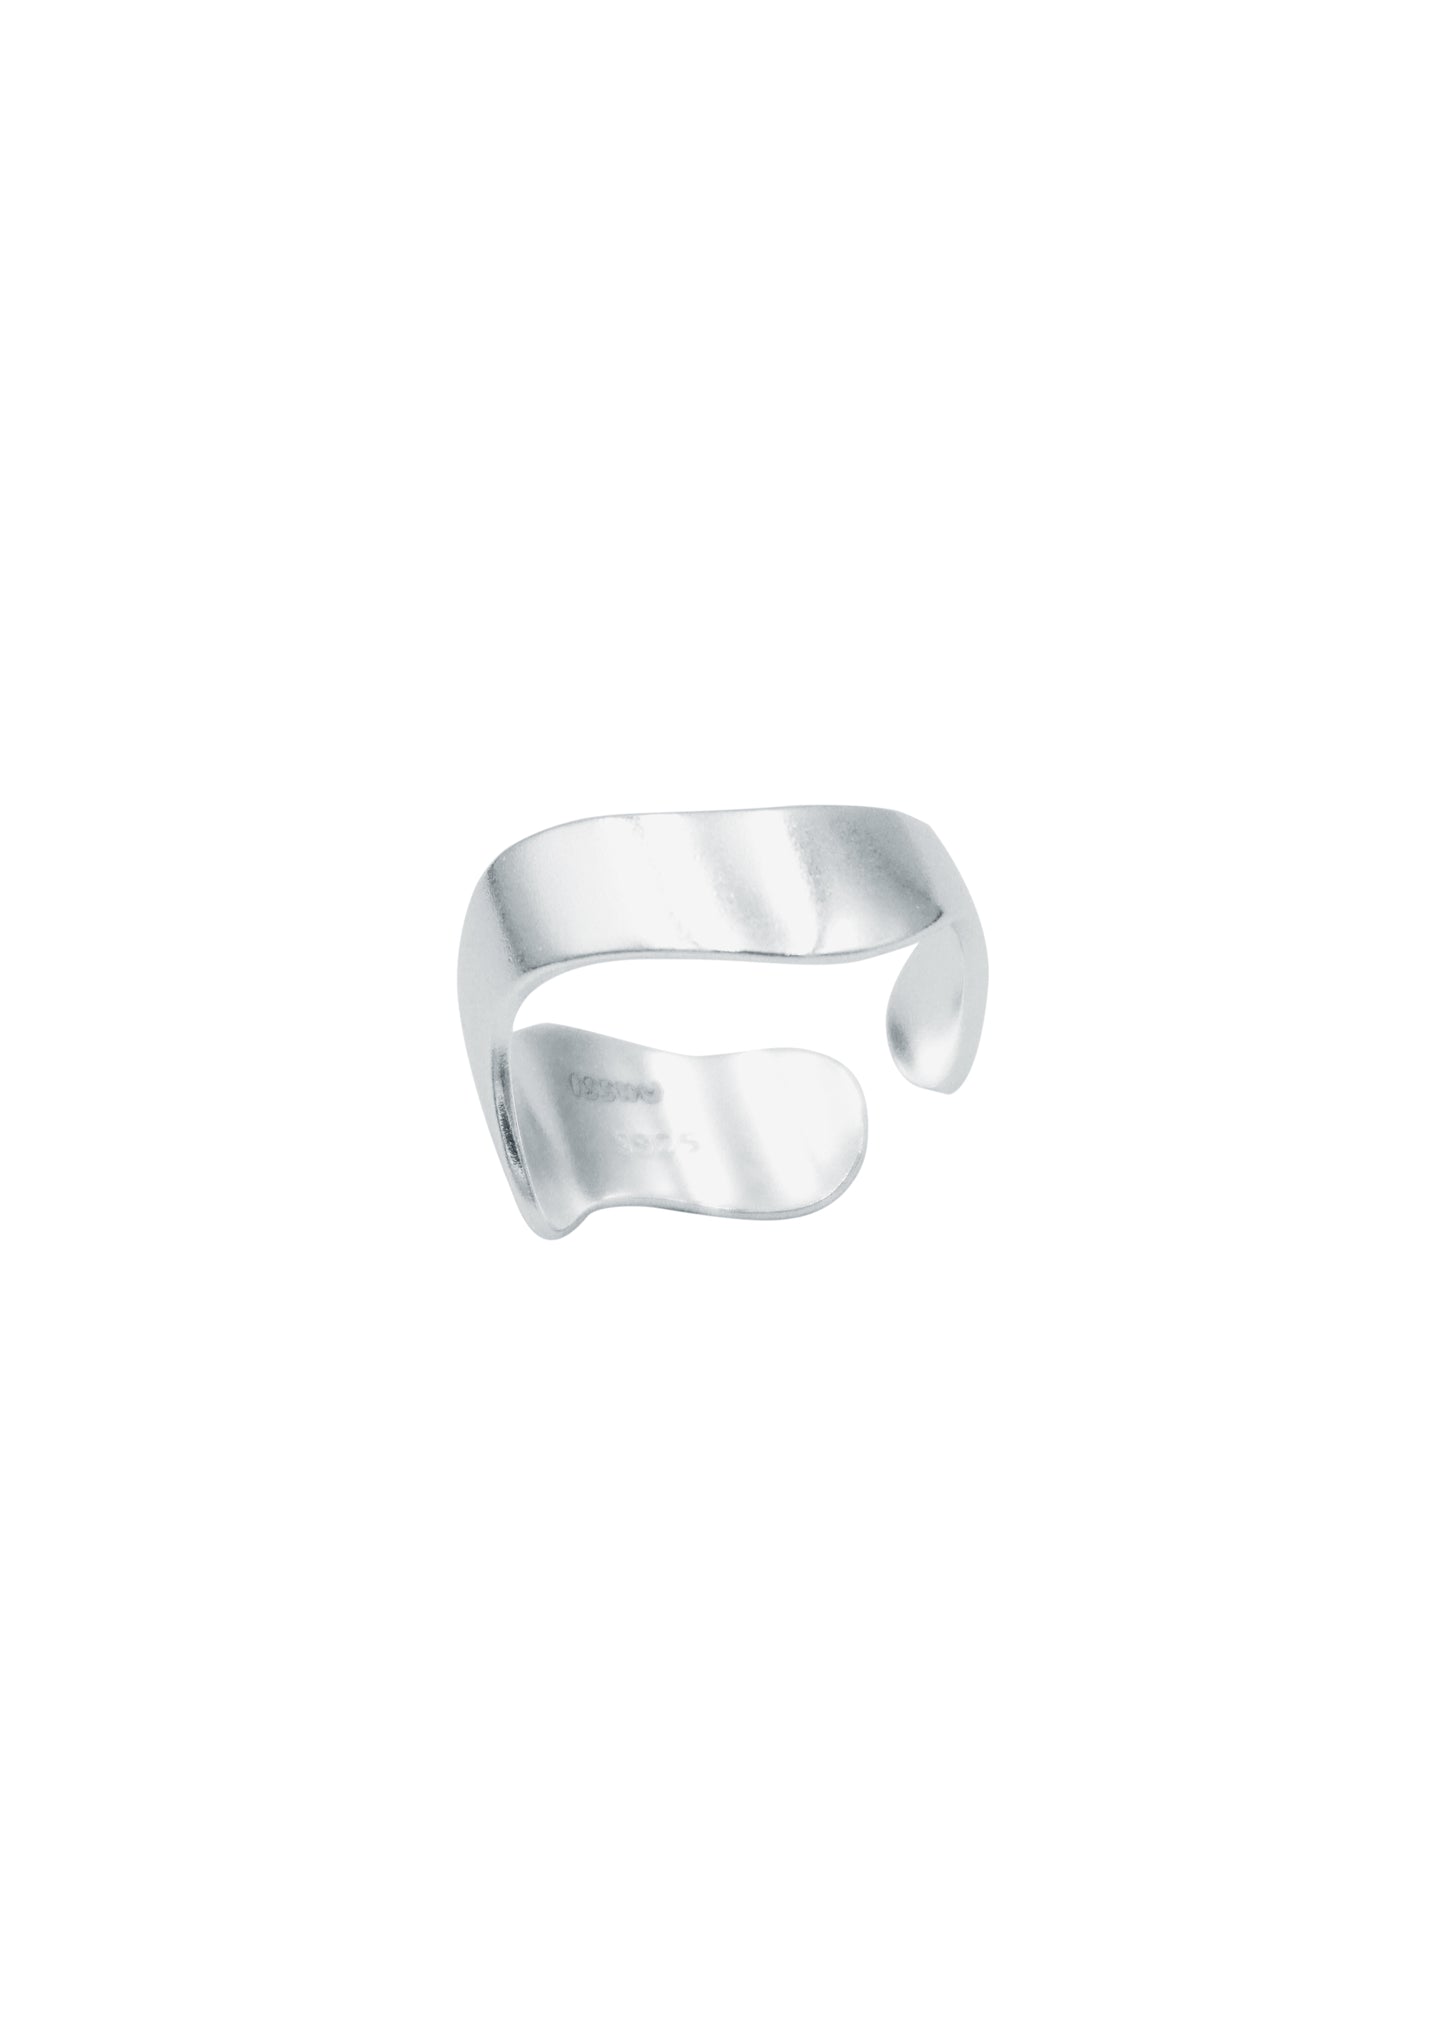 Mage Ring - Silver - Catalog - Side View